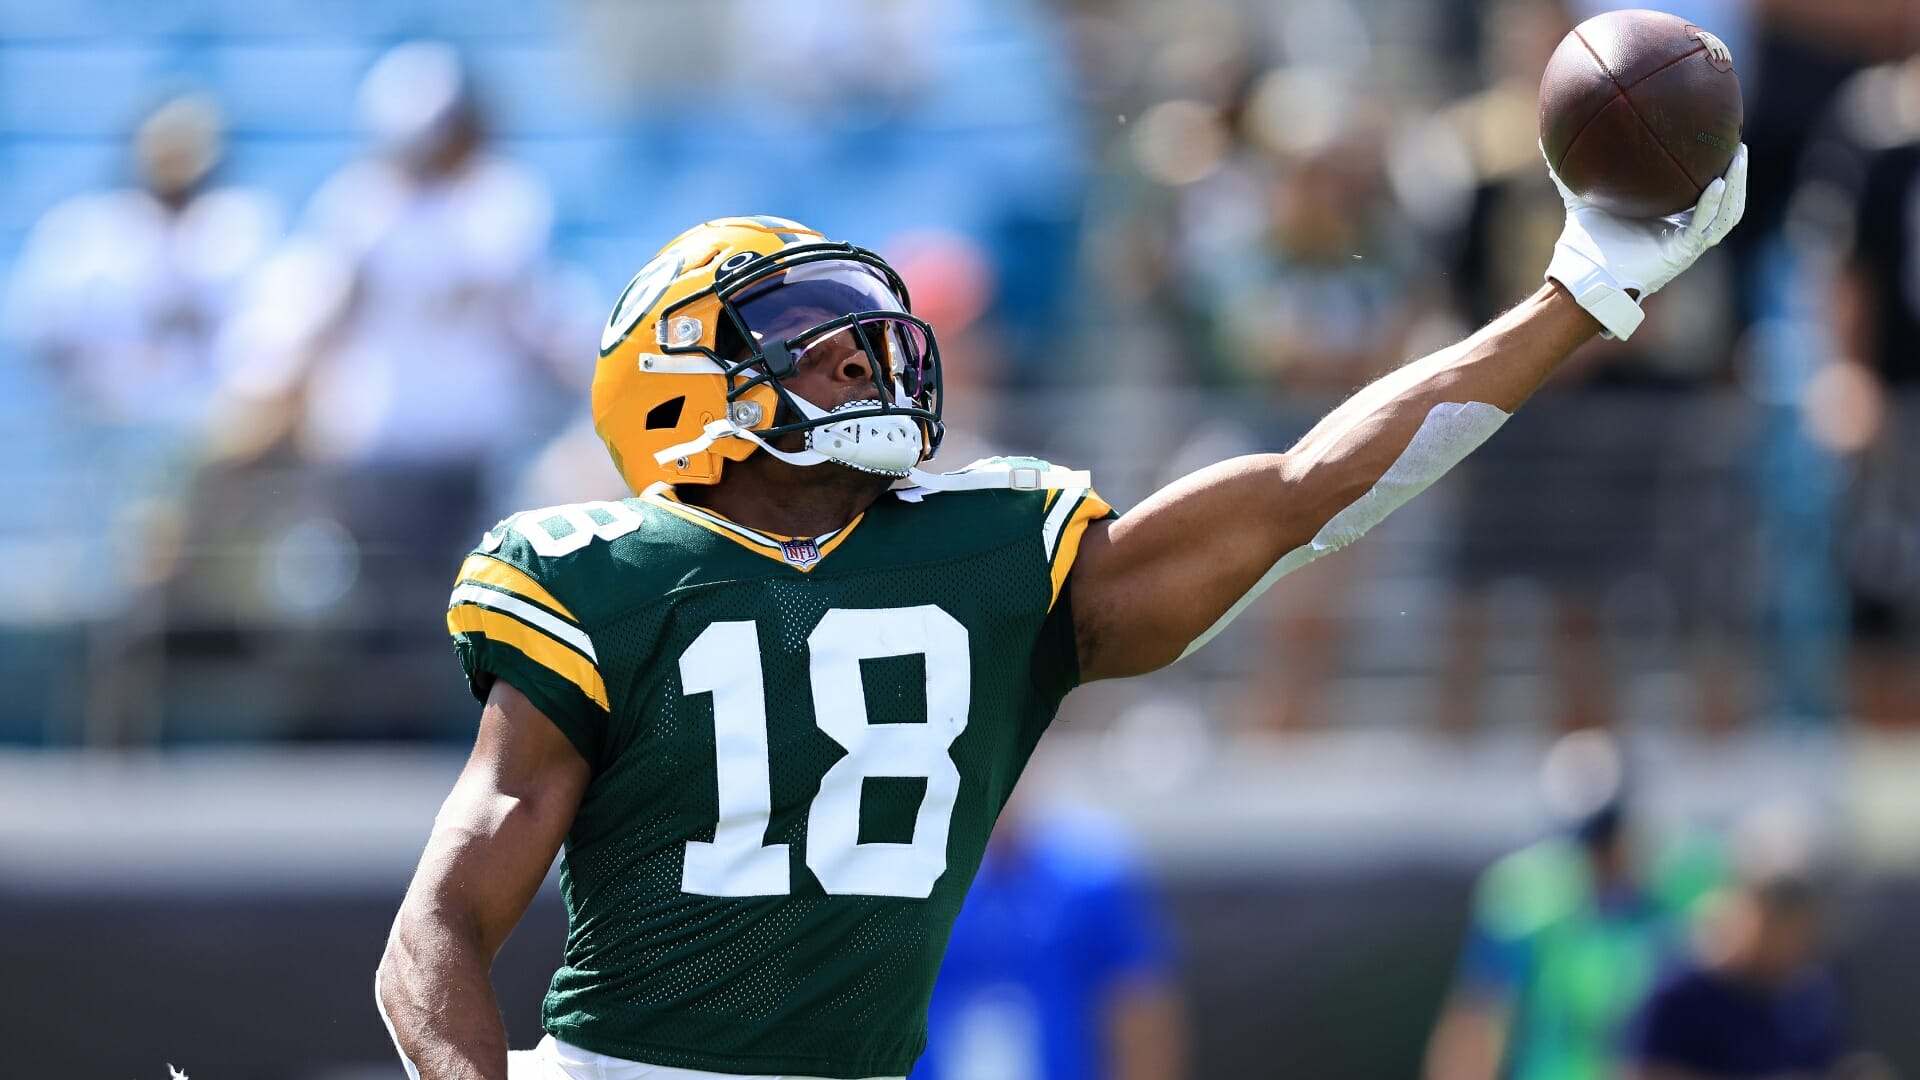 Randall Cobb extends for a one-handed catch